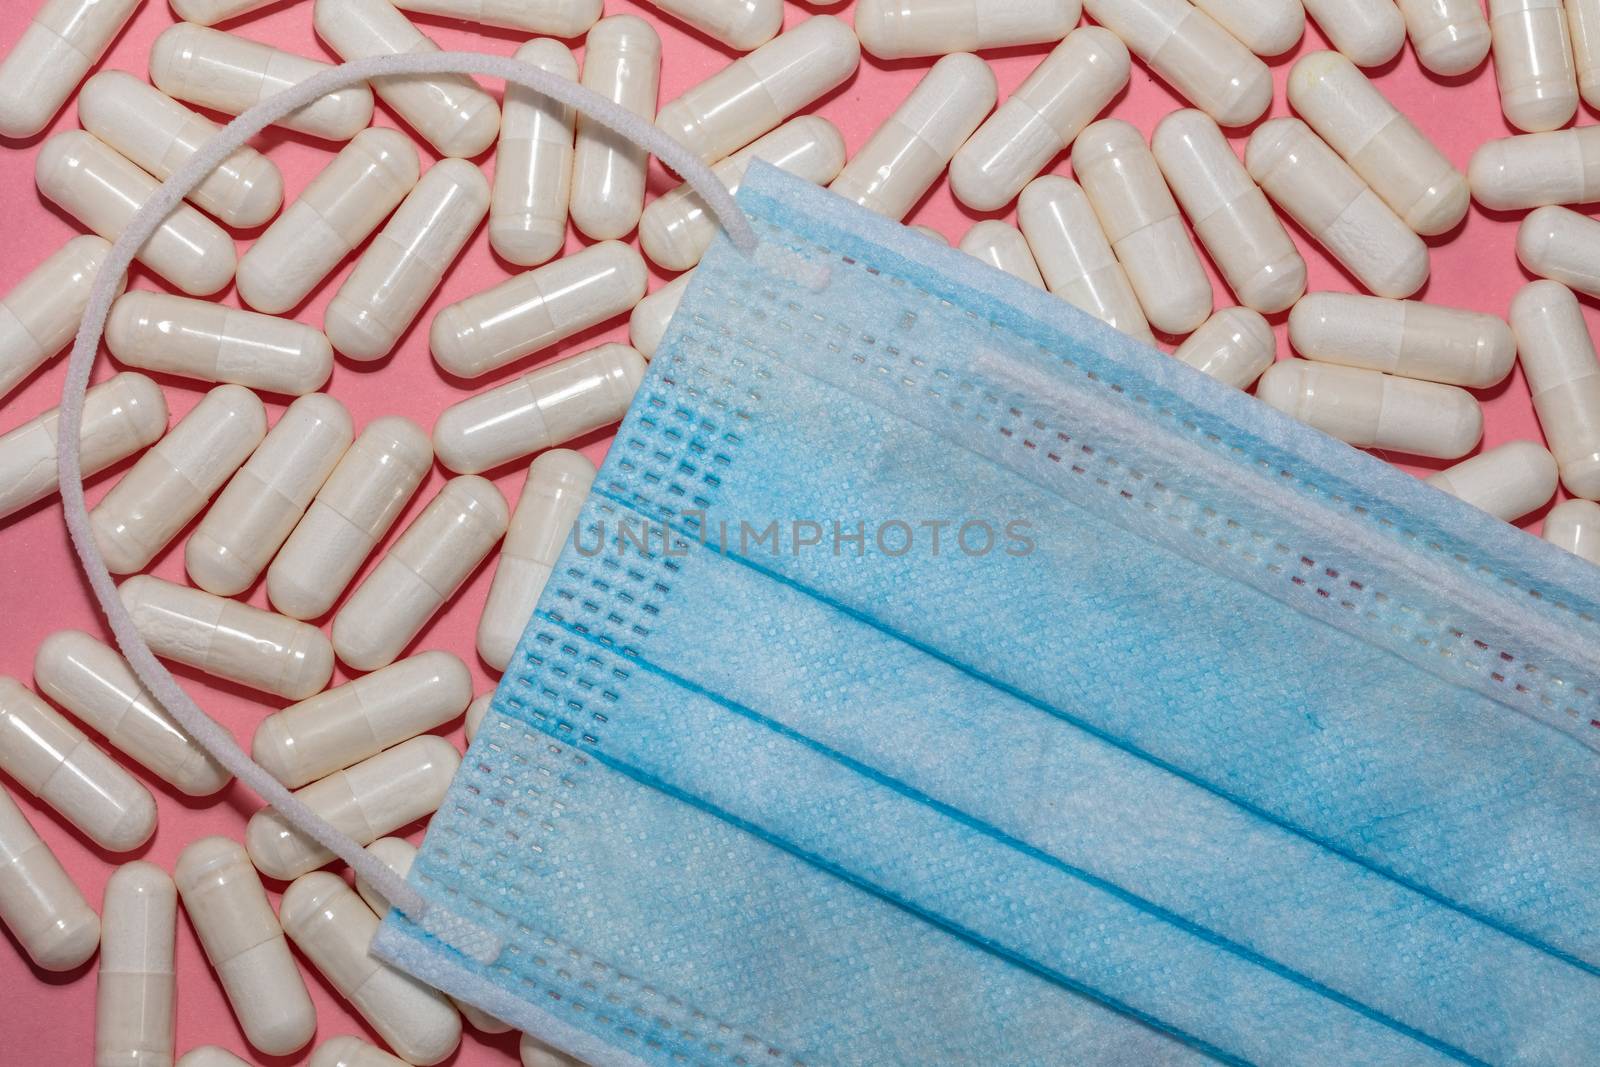 Top close up shot of white pills and blue medical mask on top of them on pink background. Healthcare, medical and pharmaceutical concept. New normal and reality concept. by DamantisZ